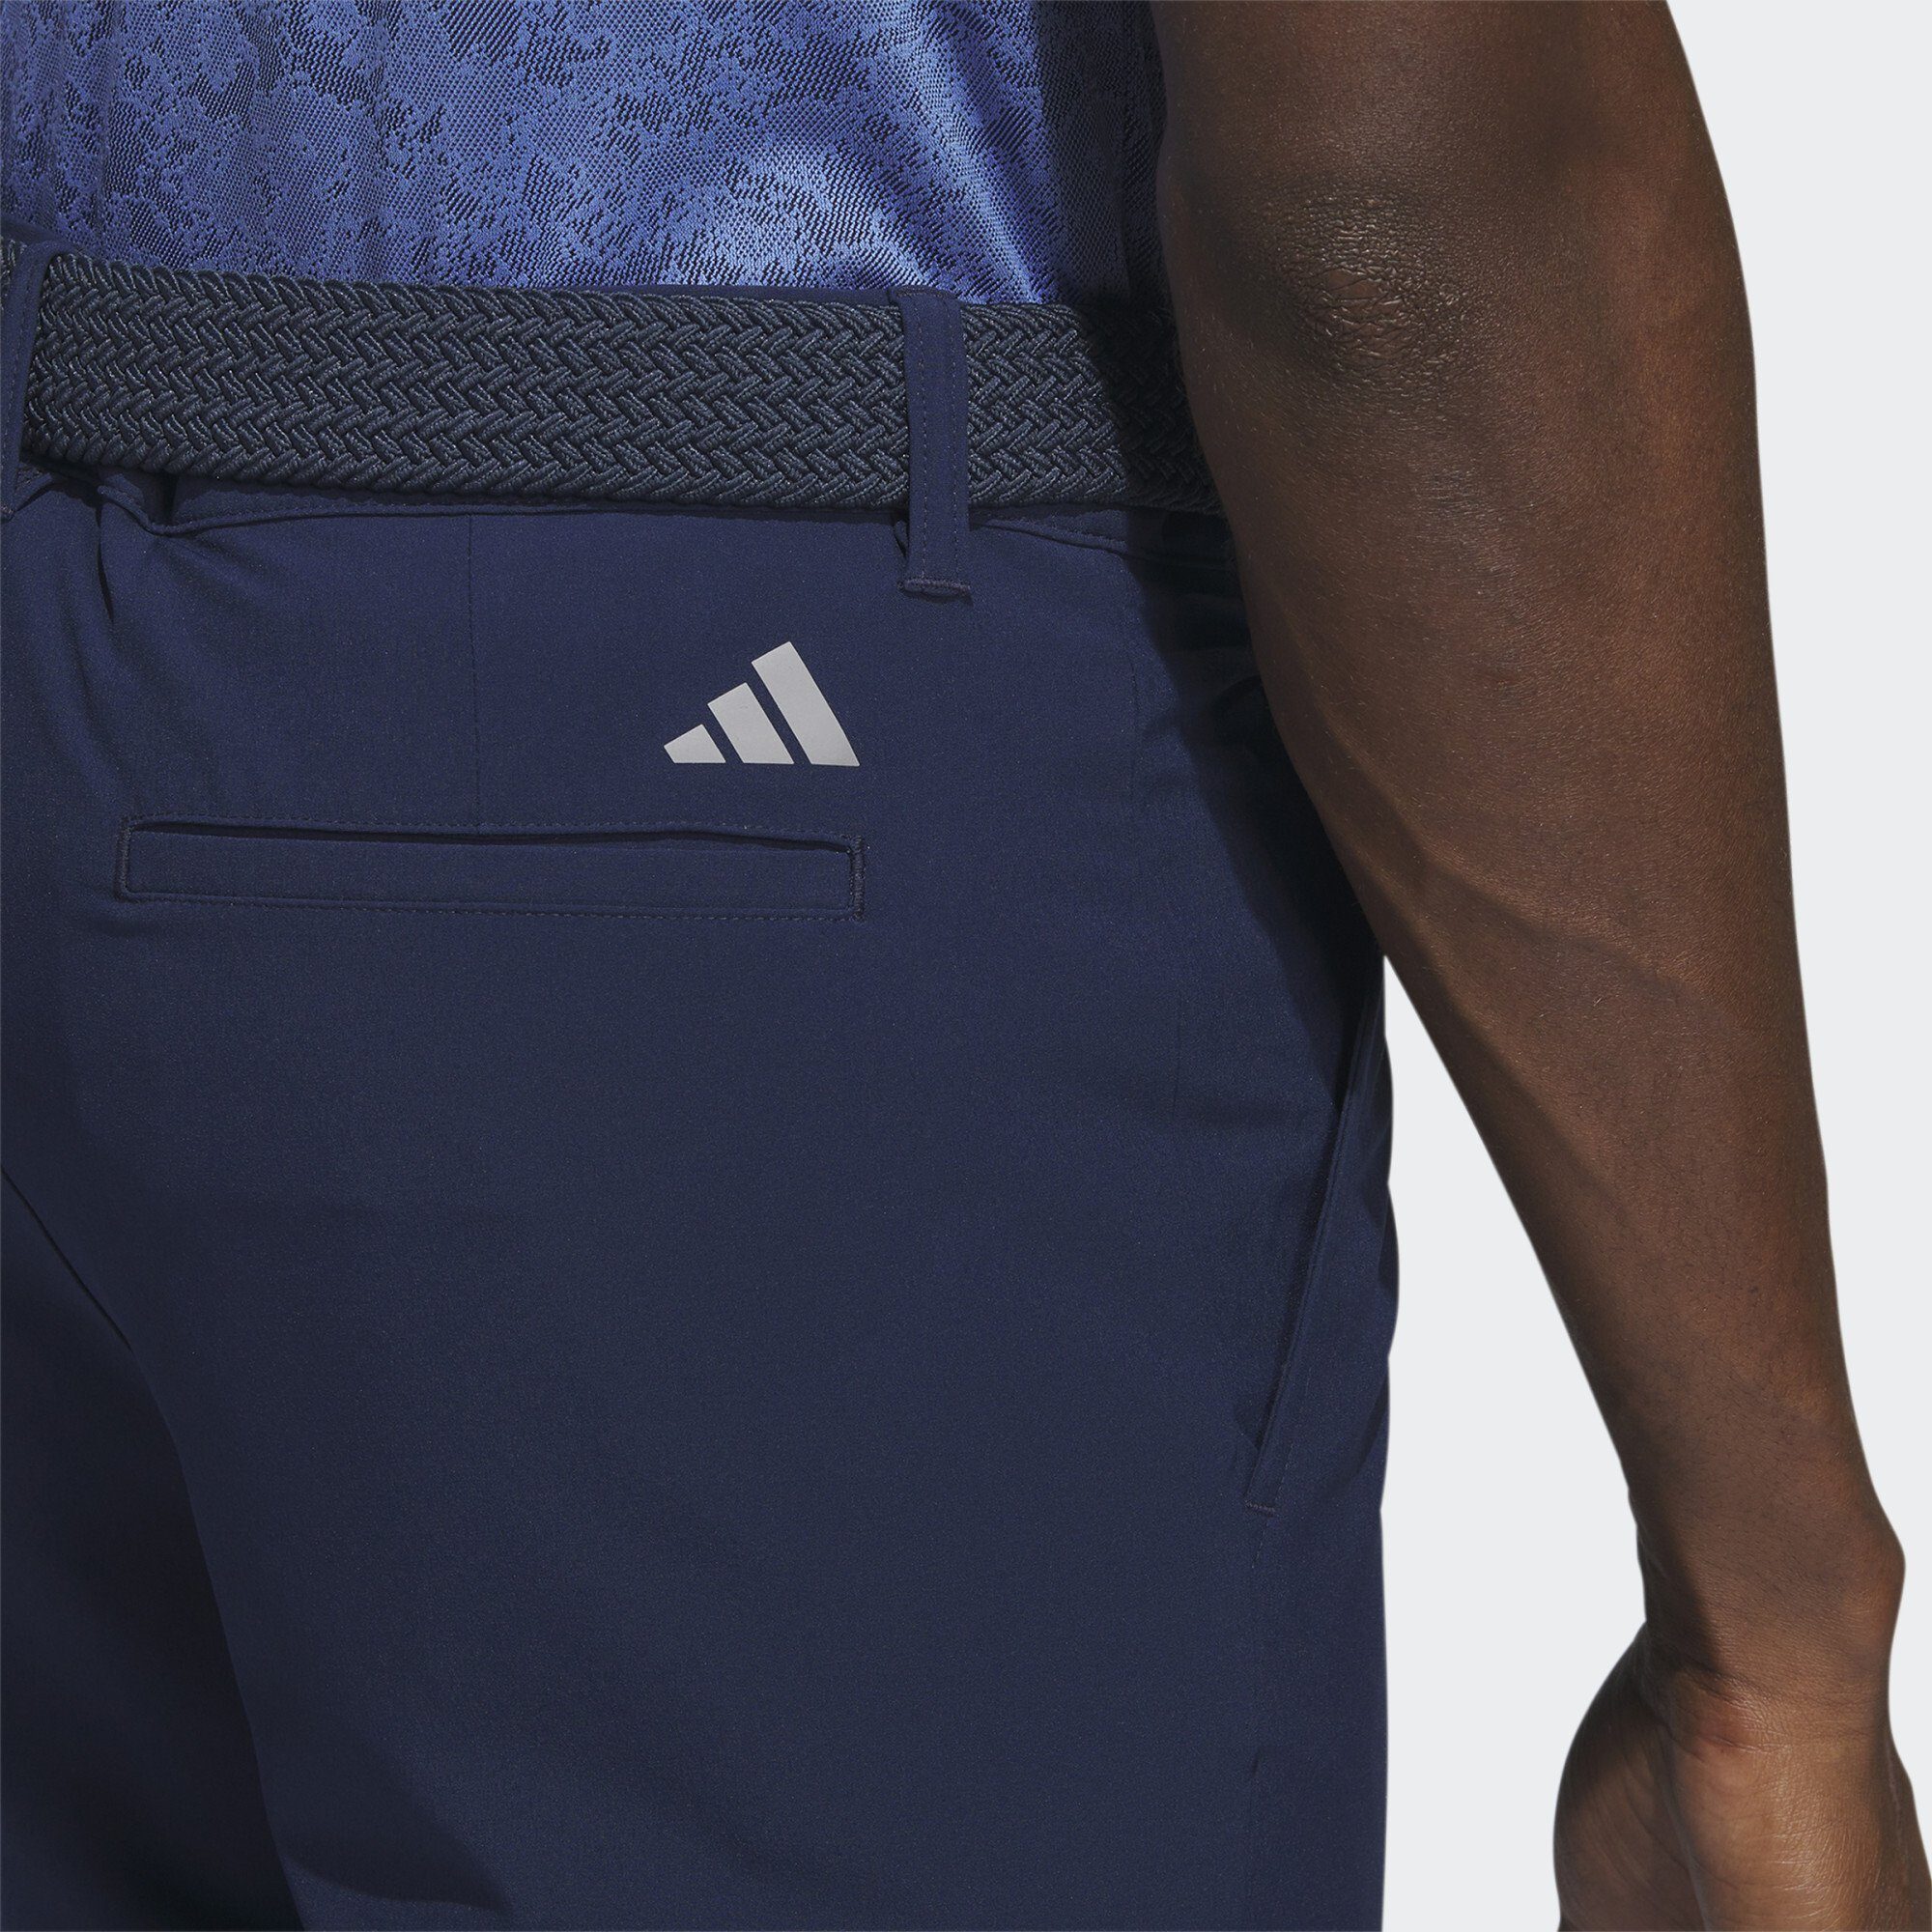 ULTIMATE365 Collegiate Funktionsshorts Navy Performance SHORTS adidas GOLF 8.5-INCH